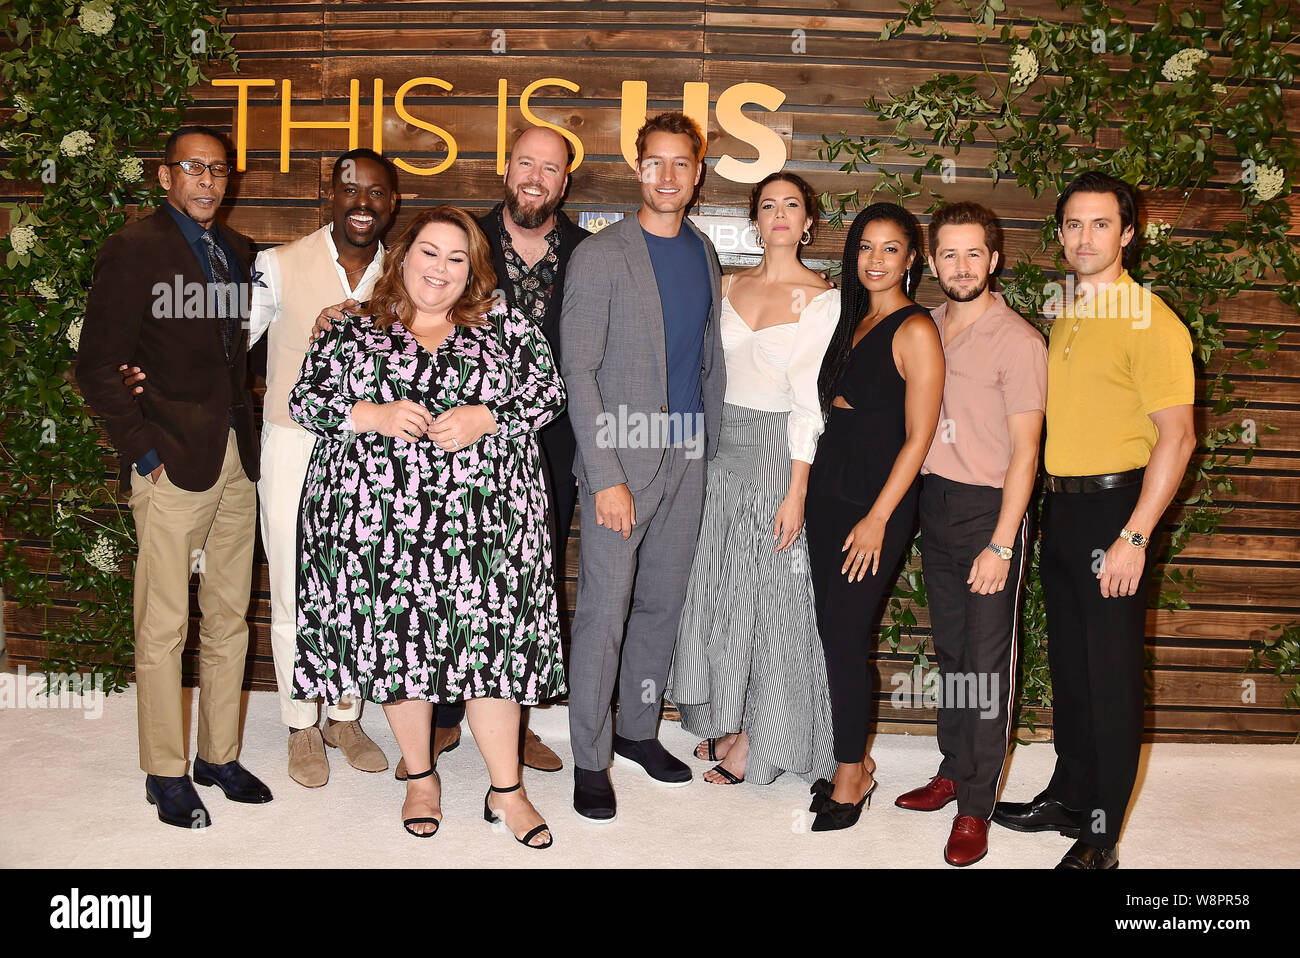 WEST HOLLYWOOD, CA - AUGUST 10: (L-R) Ron Cephas Jones, Sterling K. Brown, Chrissy Metz, Chris Sullivan, Justin Hartley, Mandy Moore, Susan Kelechi Watson, Michael Angarano and Milo Ventimiglia  attend NBC's 'This Is Us' Pancakes with the Pearsons at 1 Hotel West Hollywood on August 10, 2019 in West Hollywood, California. Stock Photo